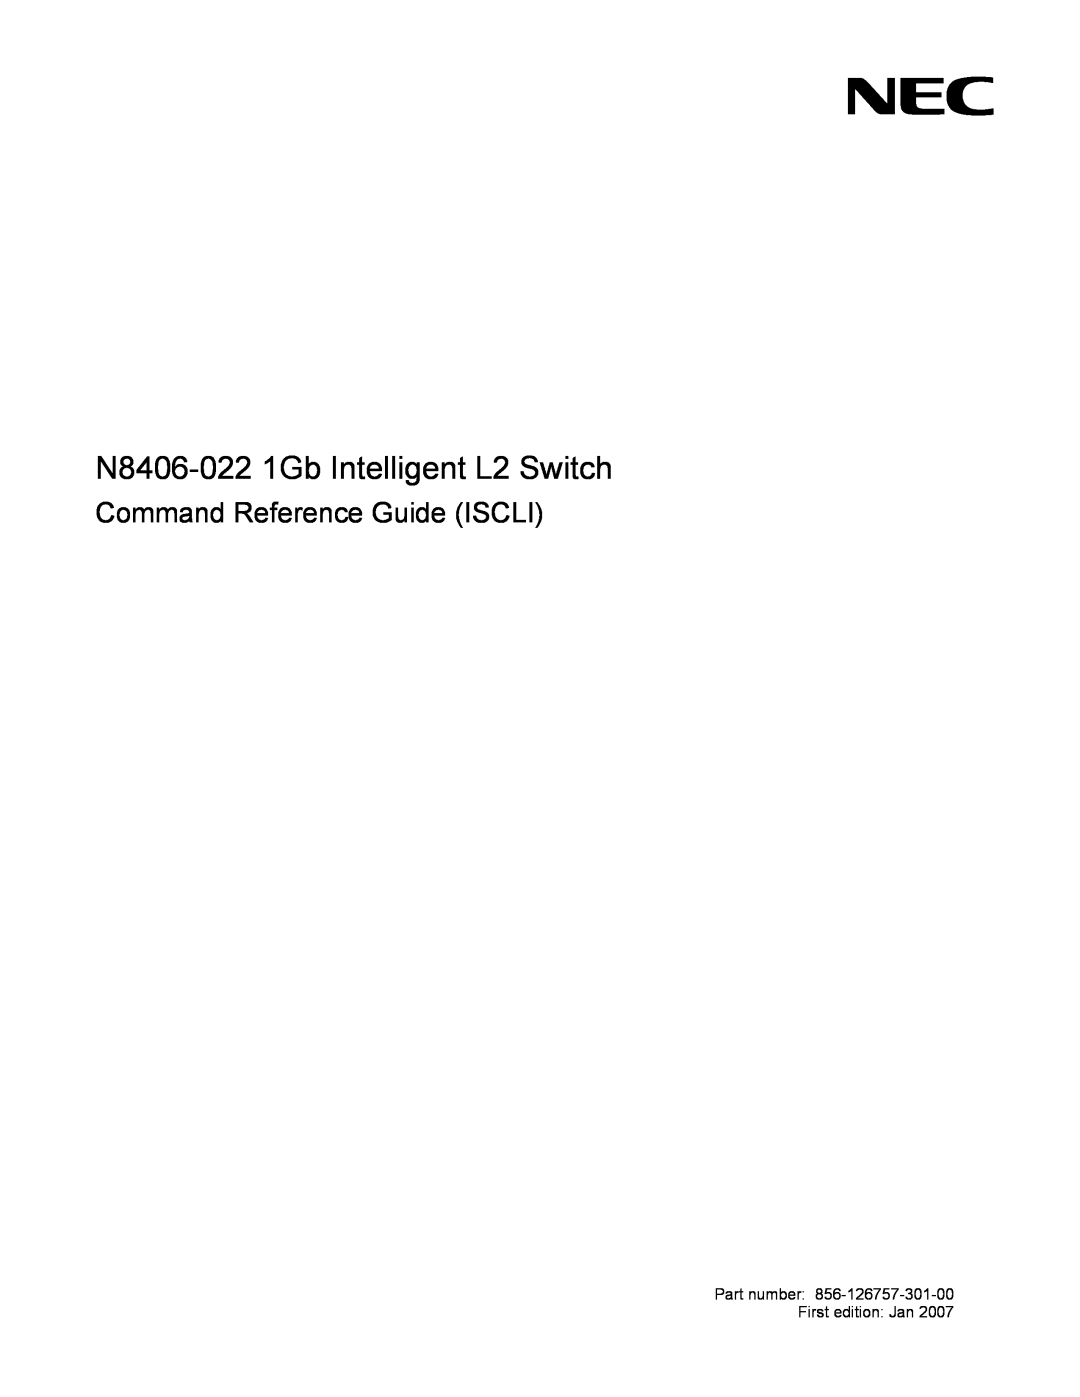 NEC manual N8406-0221Gb Intelligent L2 Switch, Command Reference Guide ISCLI 